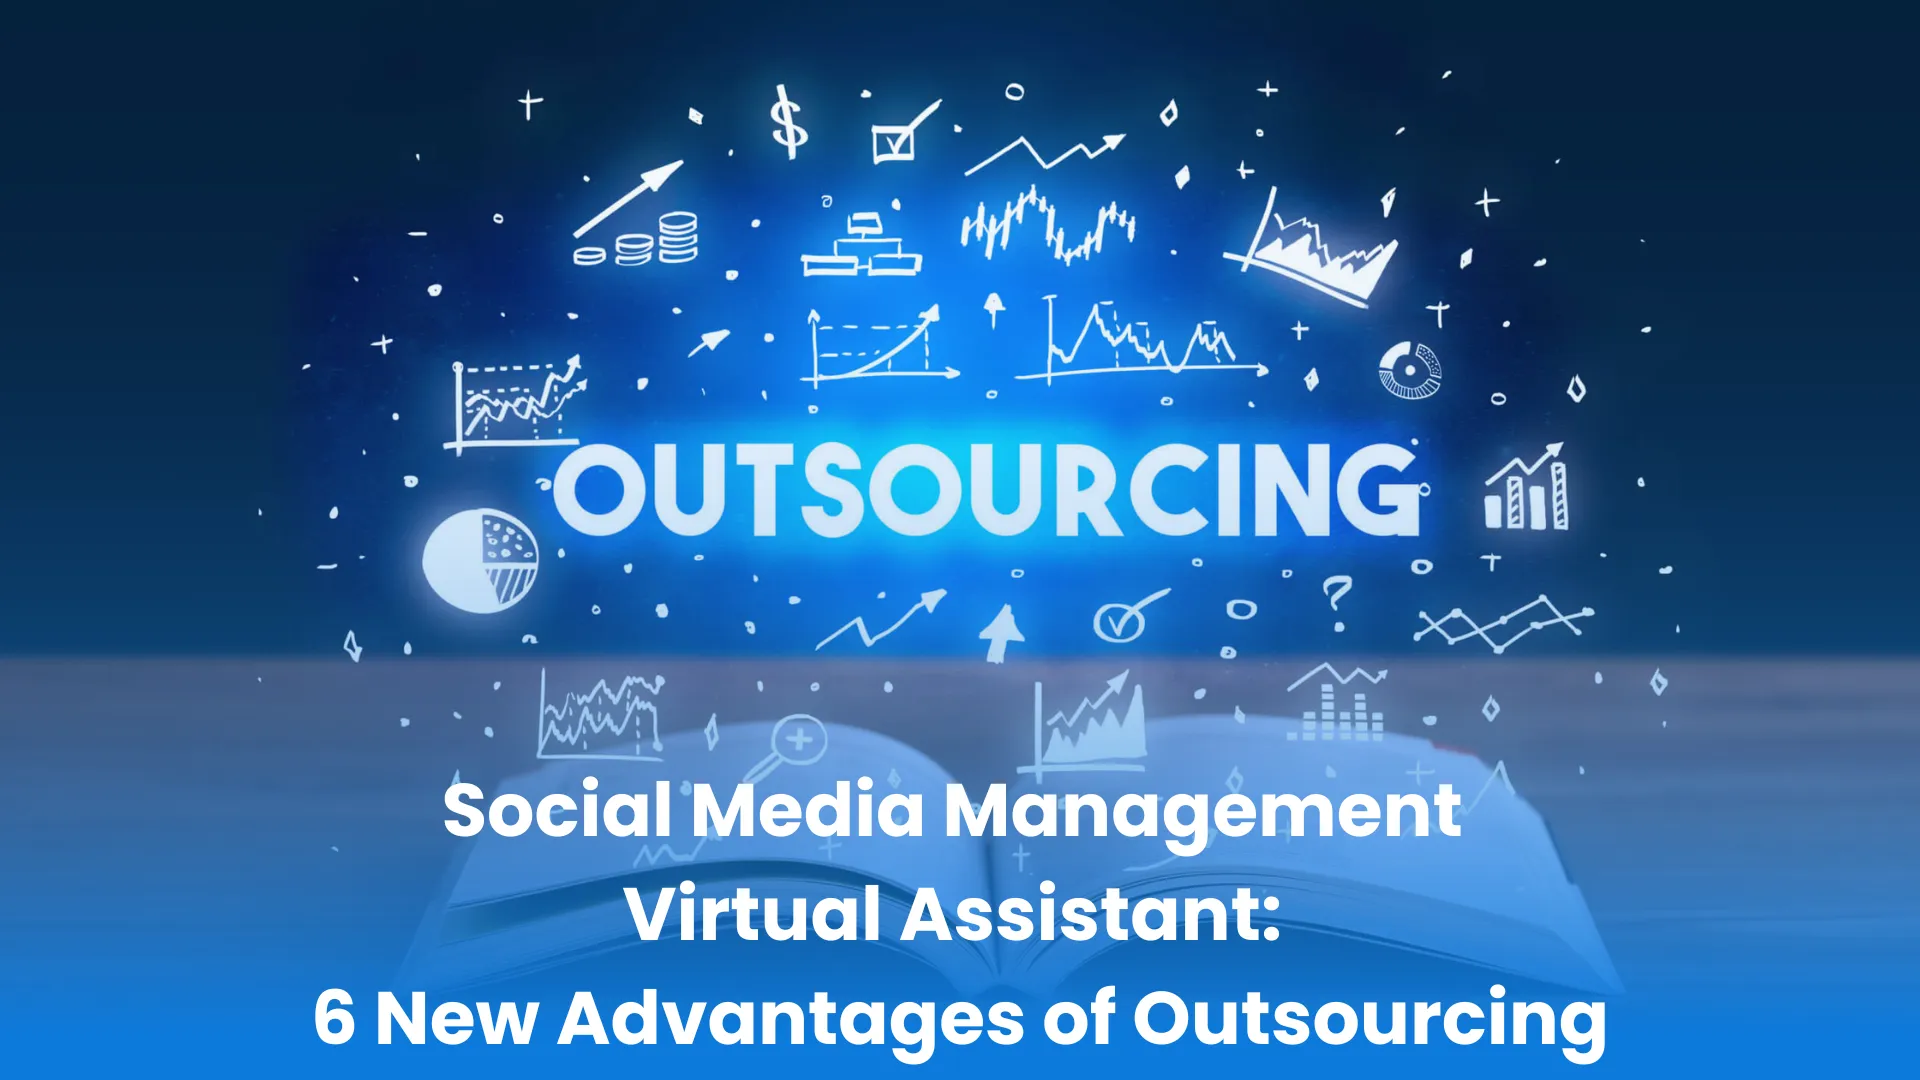 Social Media Management Virtual Assistant: 6 New Advantages of Outsourcing